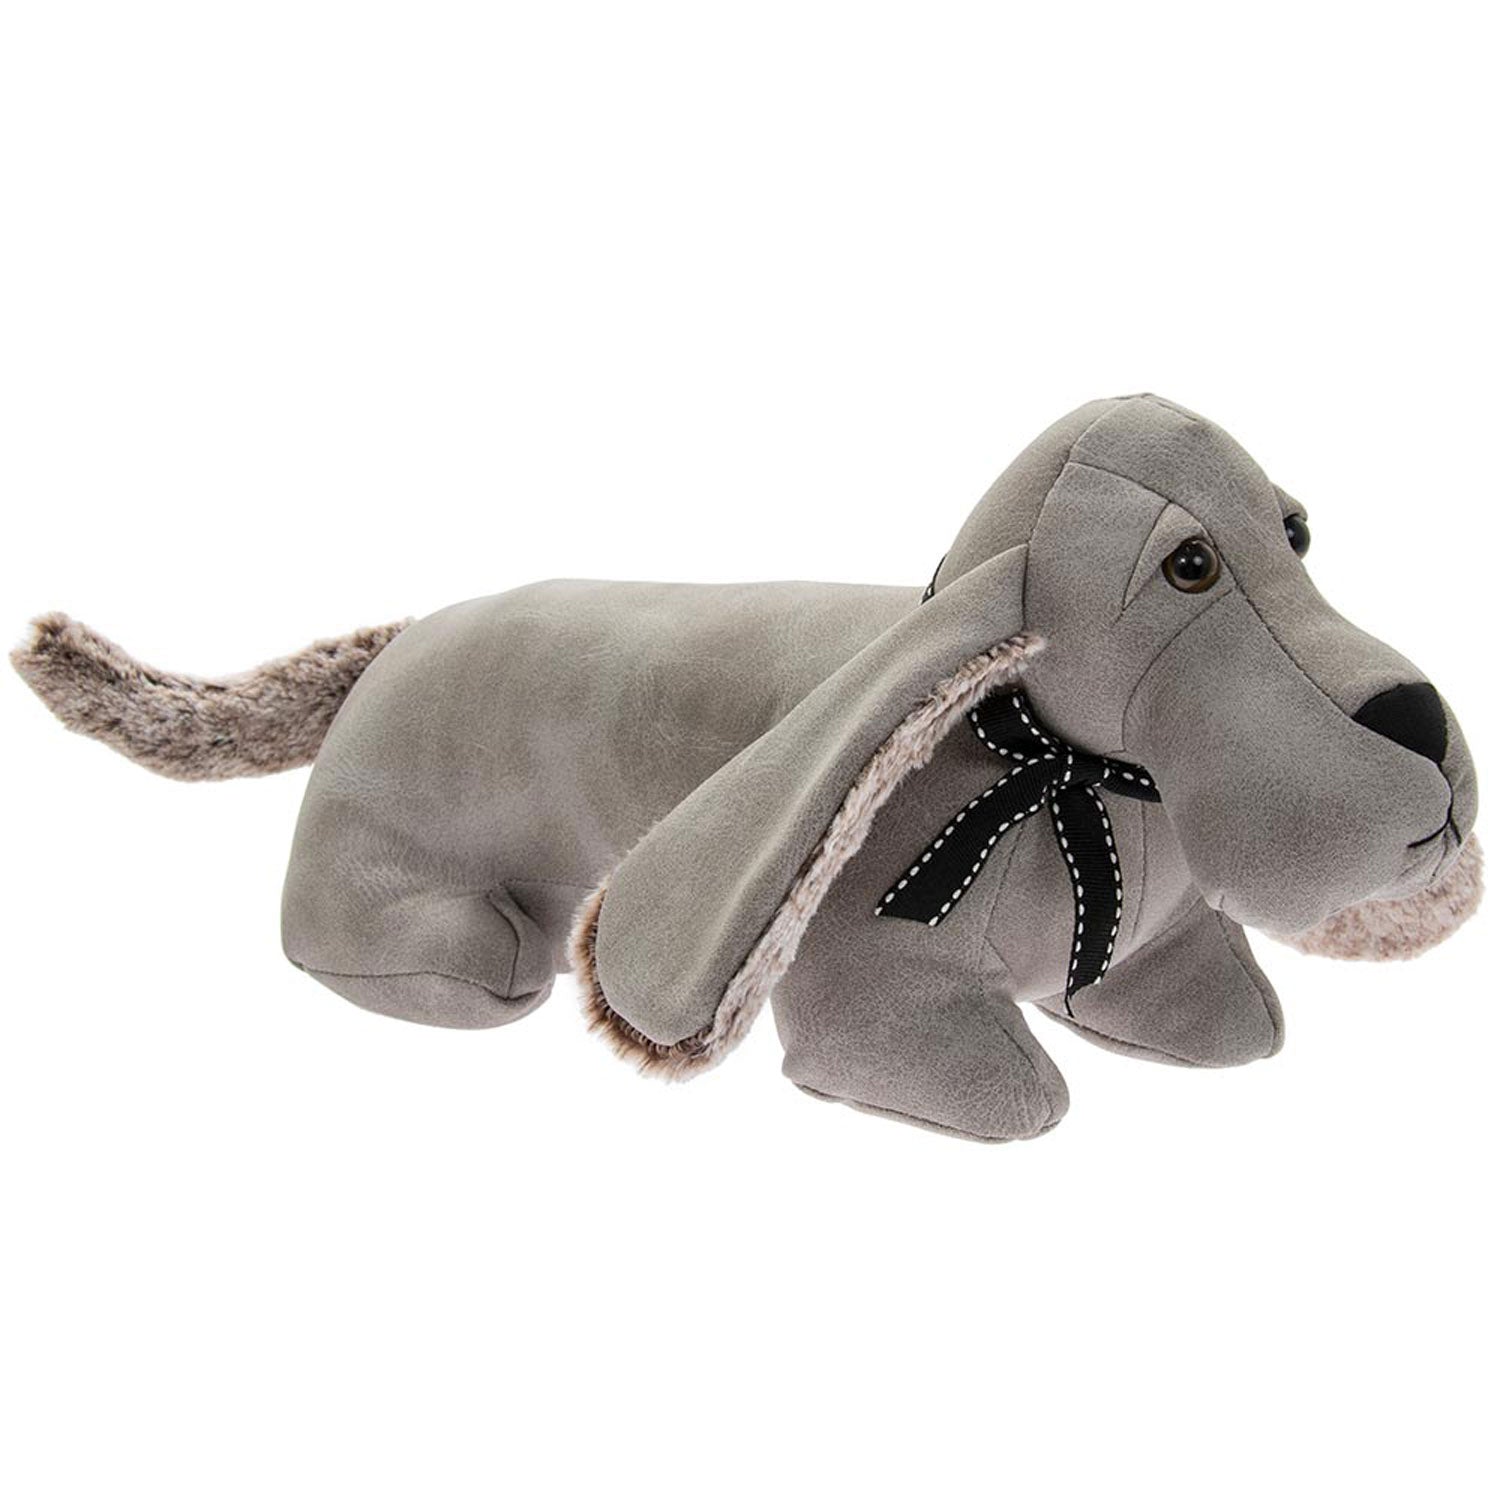 The Home Dachshund Doorstop - Grey 1 Shaws Department Stores